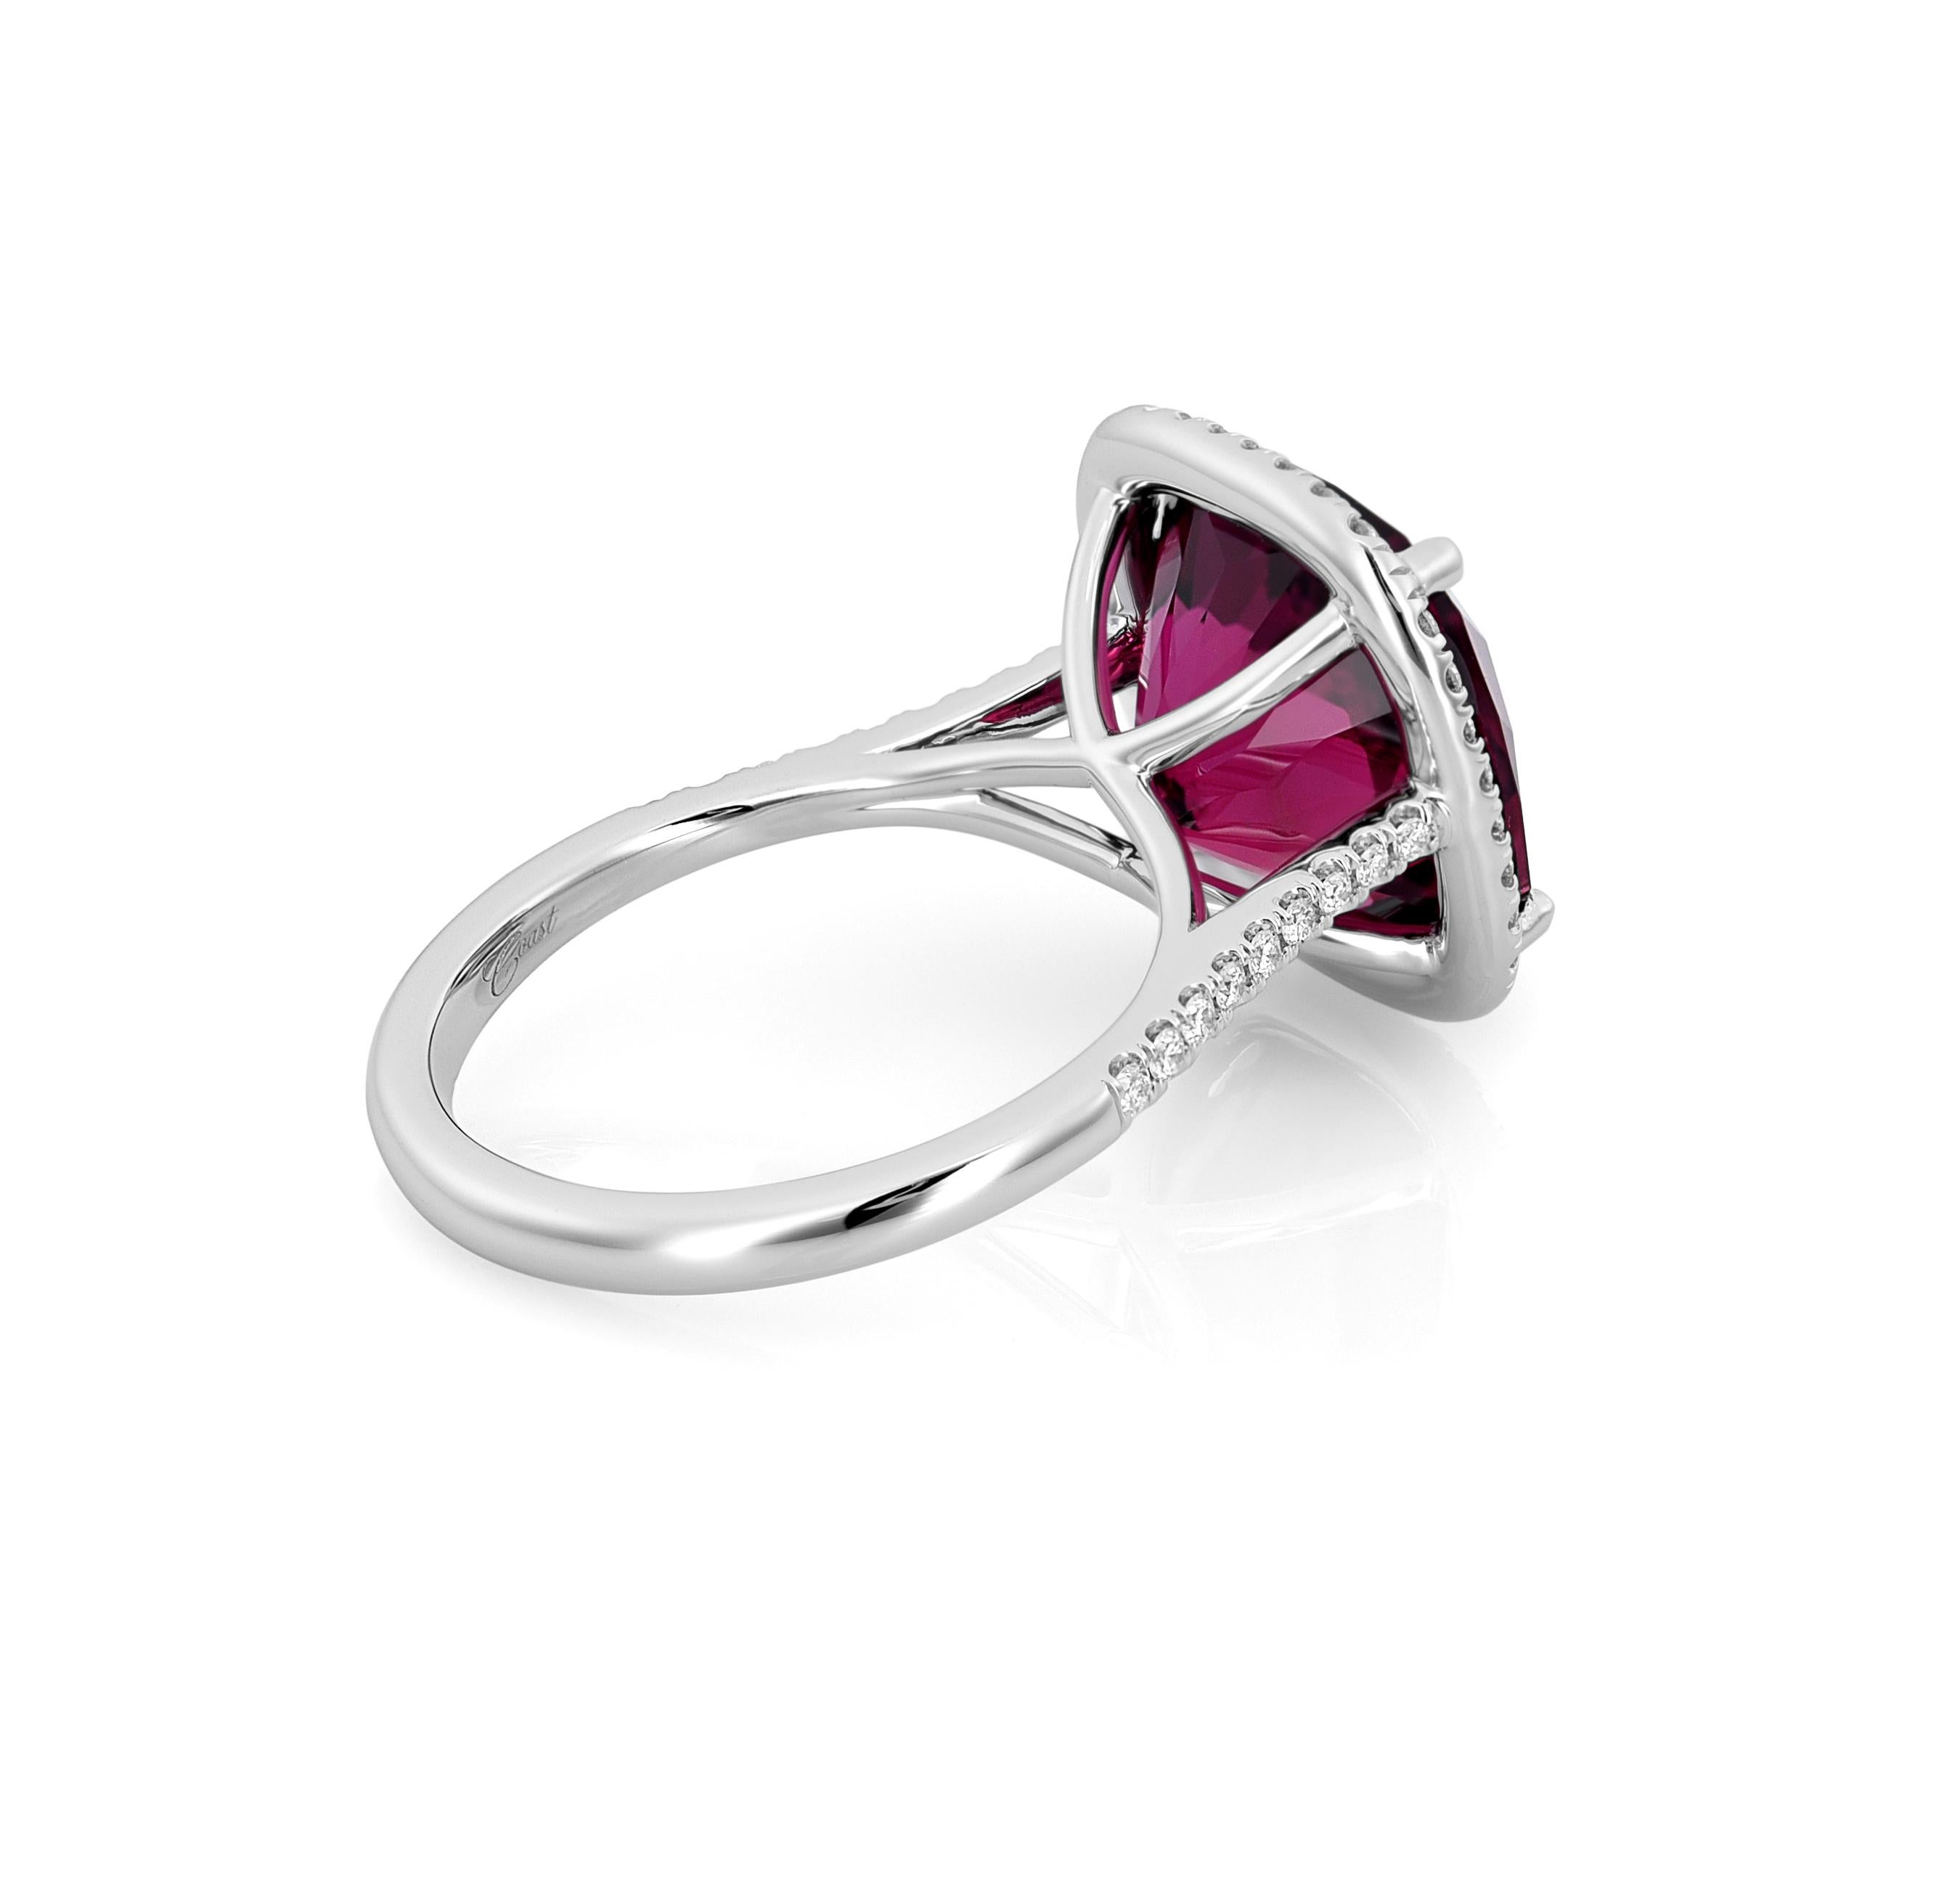 Taille mixte 7.78 Carats Natural Red Tourmaline Diamonds set in 14K White Gold Rings